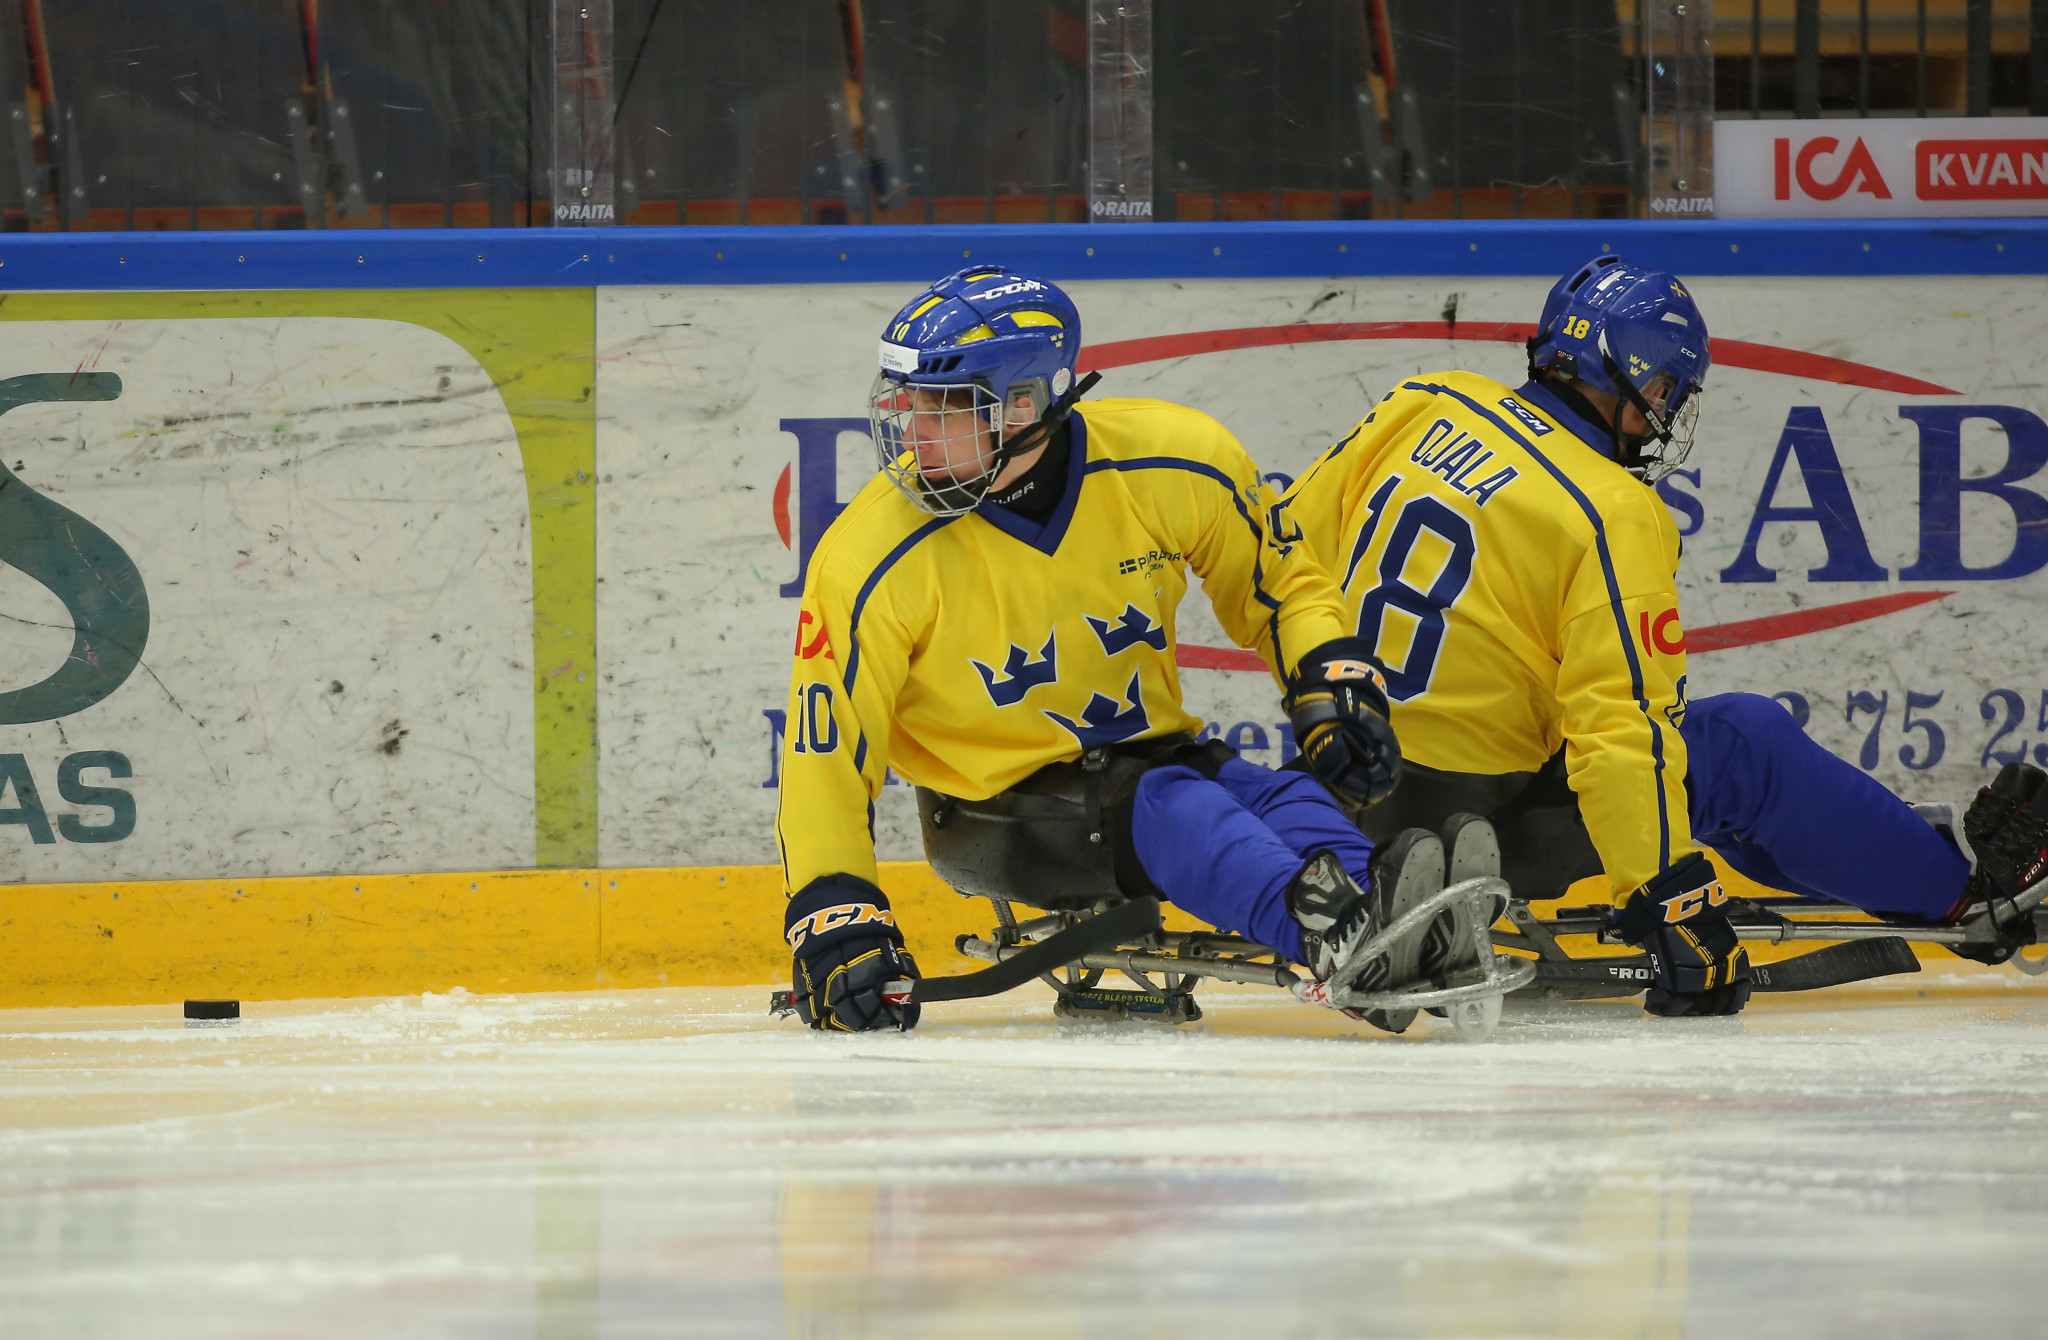 Sweden suffer second consecutive defeat at World Para Ice Hockey Qualification Tournament